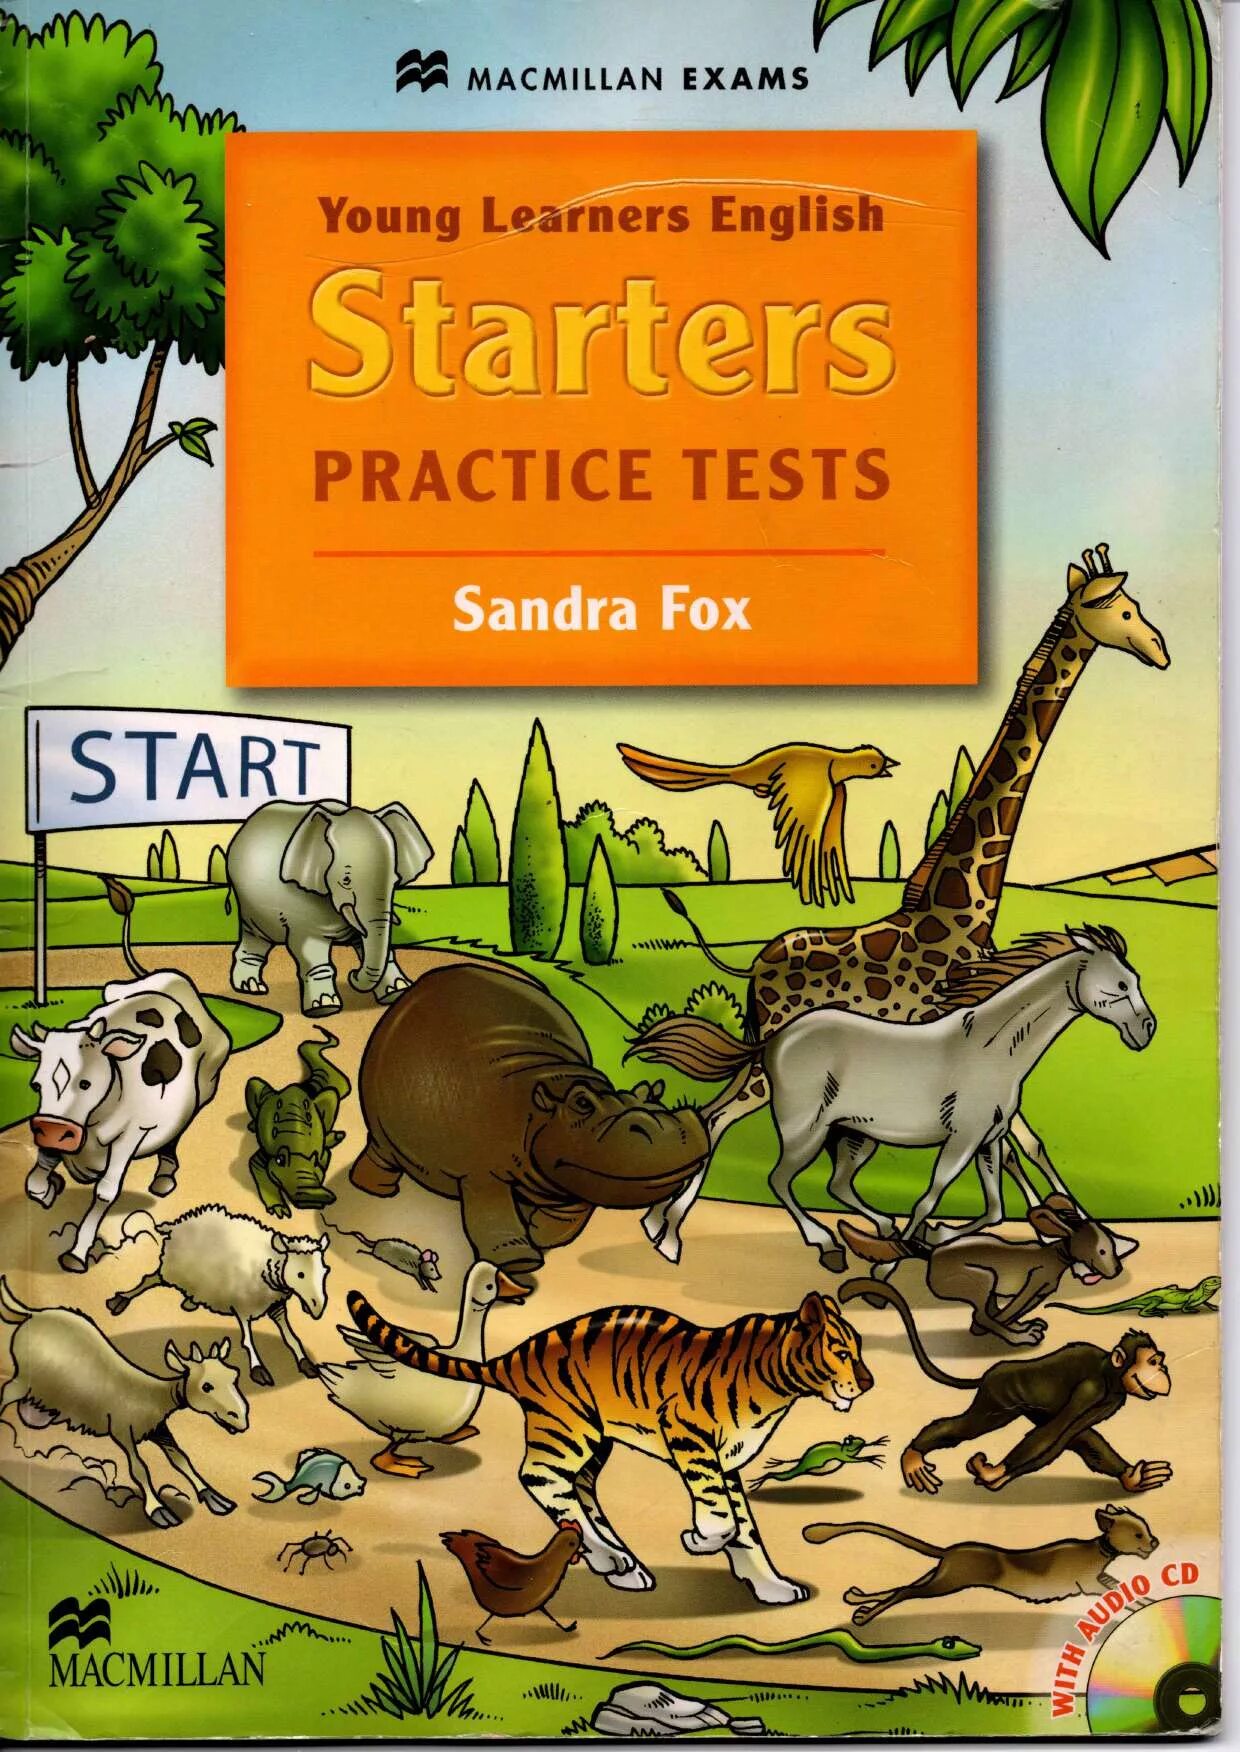 Starters practice. Young Learners English Starters. Starters Practice Tests. Practice Tests for Starters. Macmillan Practice Tests.